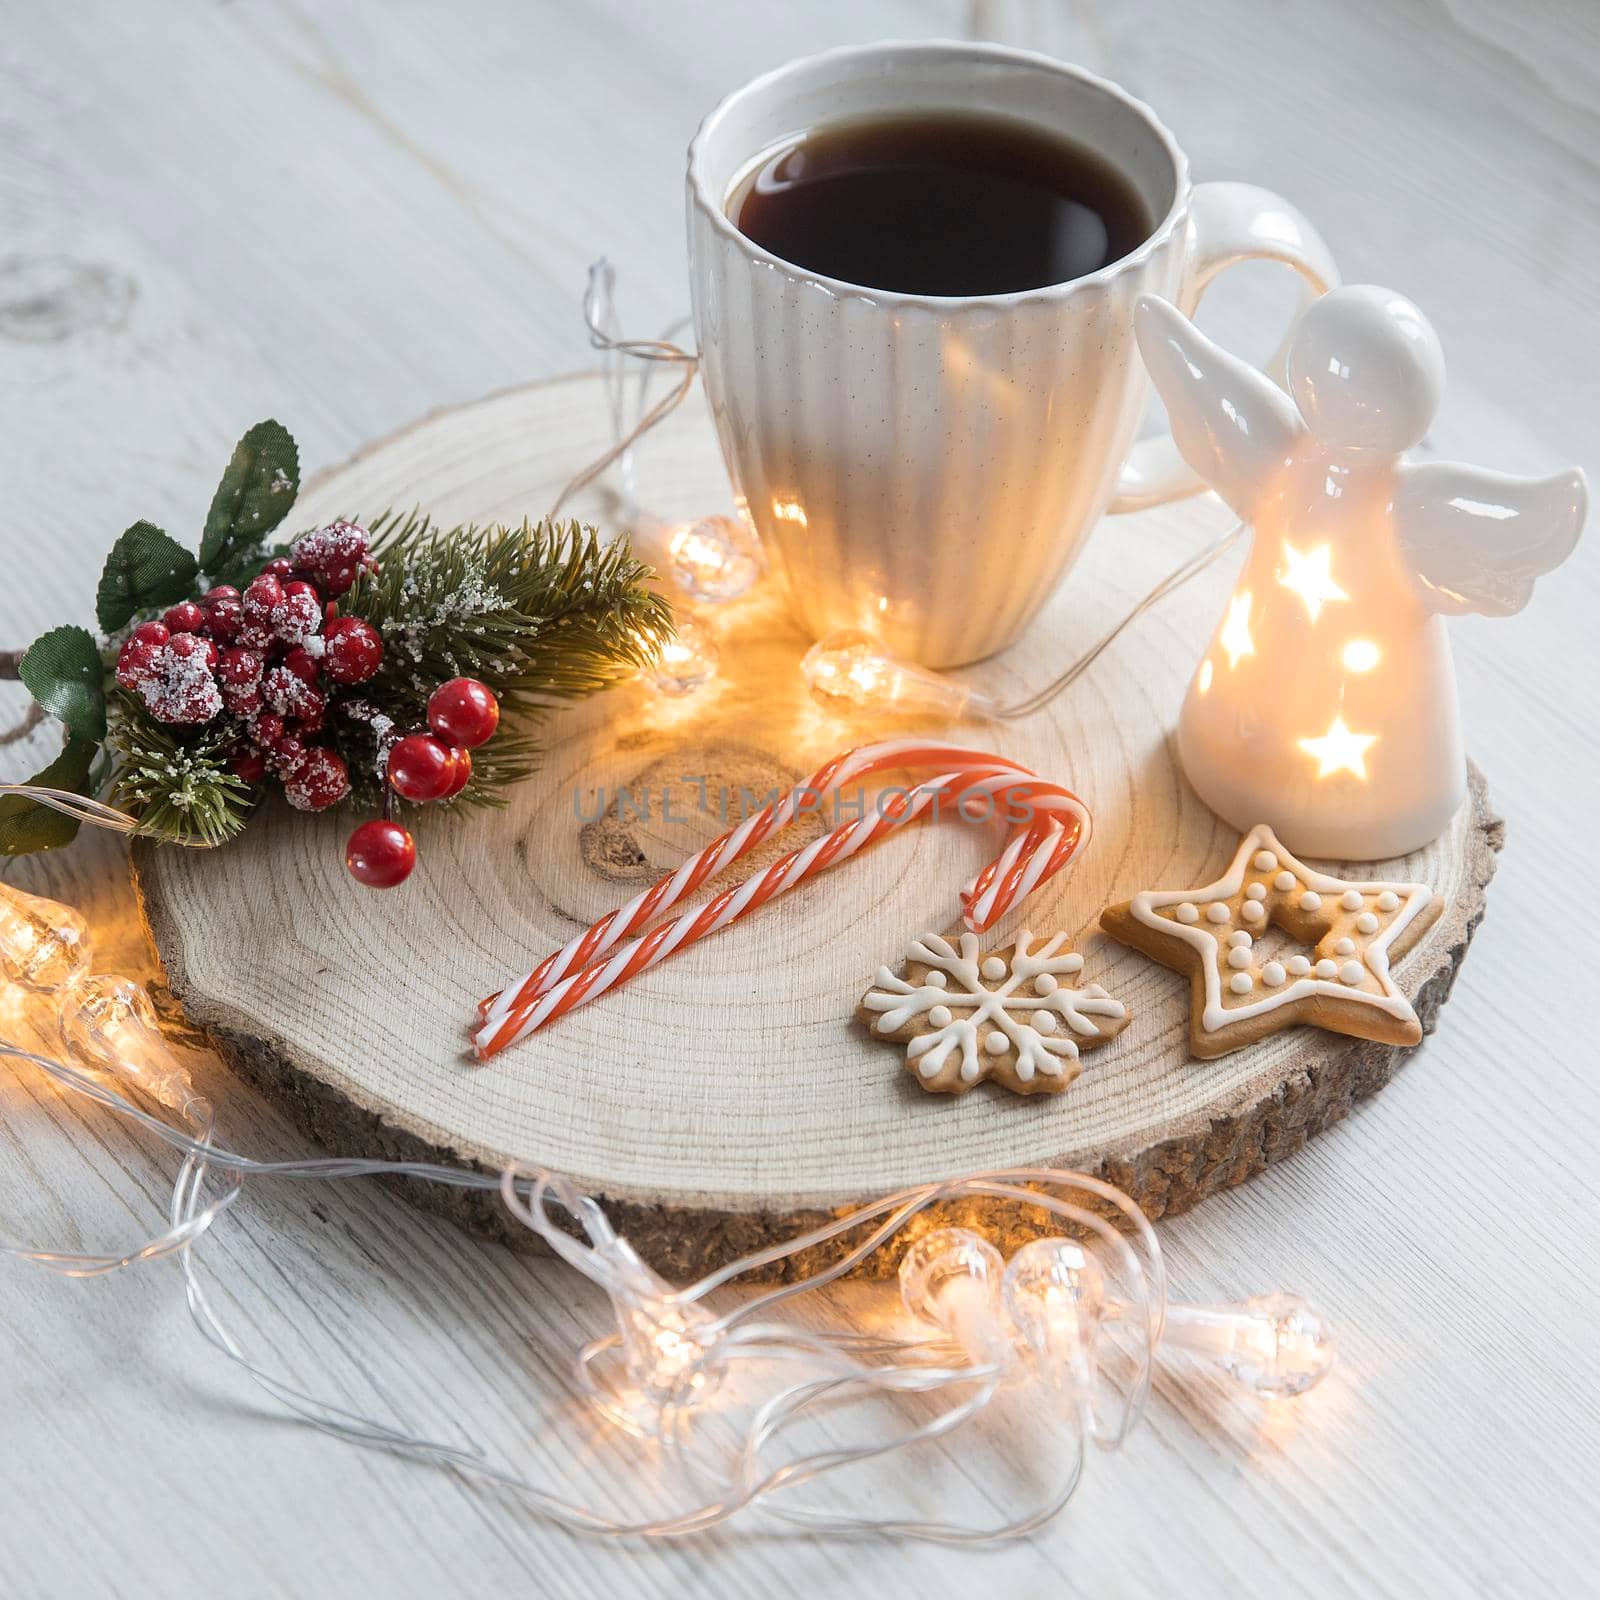 A cup of coffee on a wooden stand, a gingerbread cookie tied with a rope, a garland on the table. Artificial spruce branch with red berries. Breakfast at Christmas. Scandinavian style. Copy space by elenarostunova